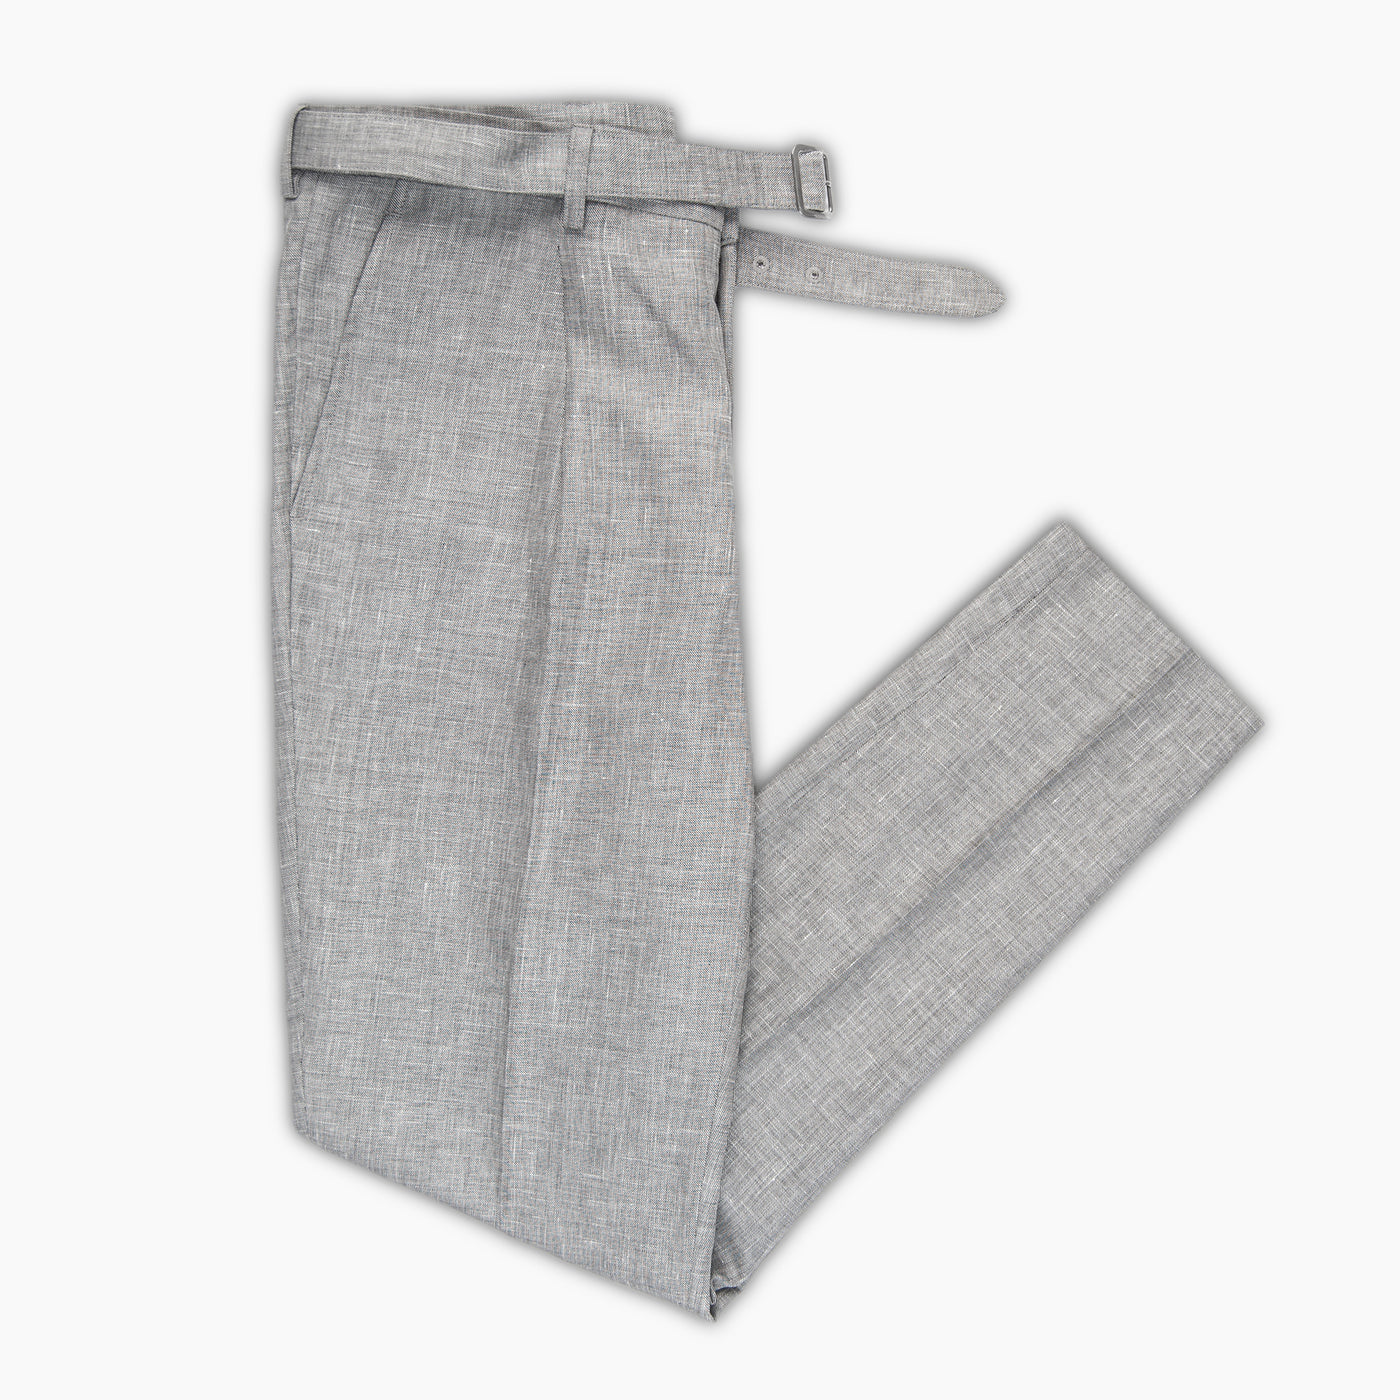 Kasey straight belted wool, linen and silk pants